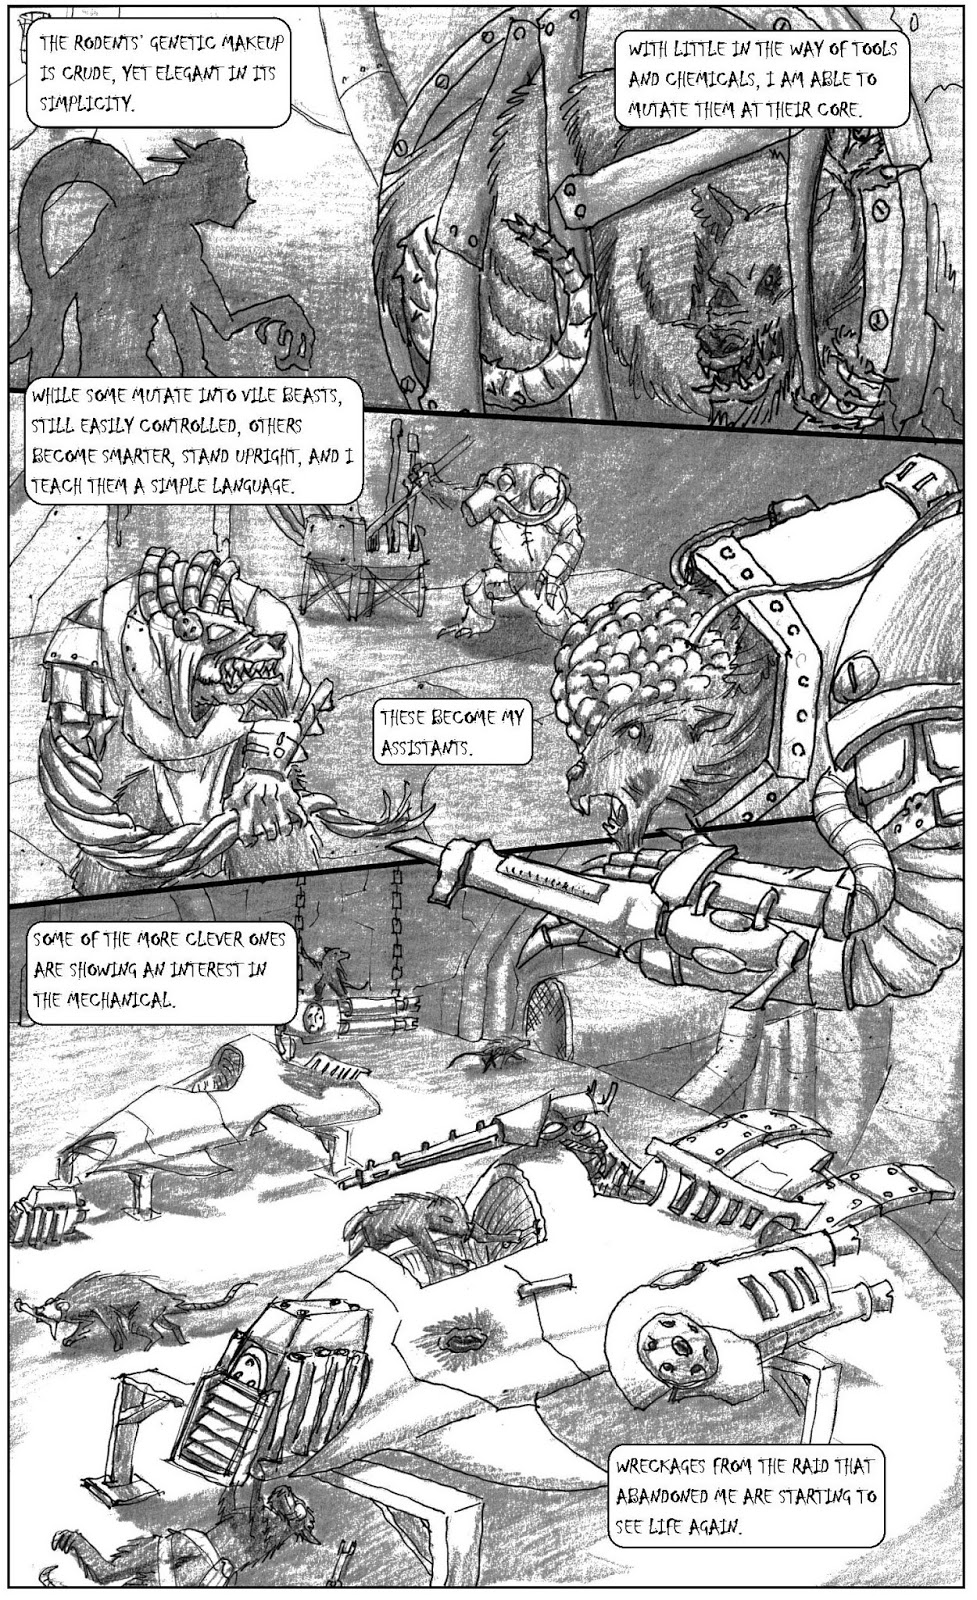 The Coven of Verminlord Skrax - An unusual Haemonculus Coven Page4